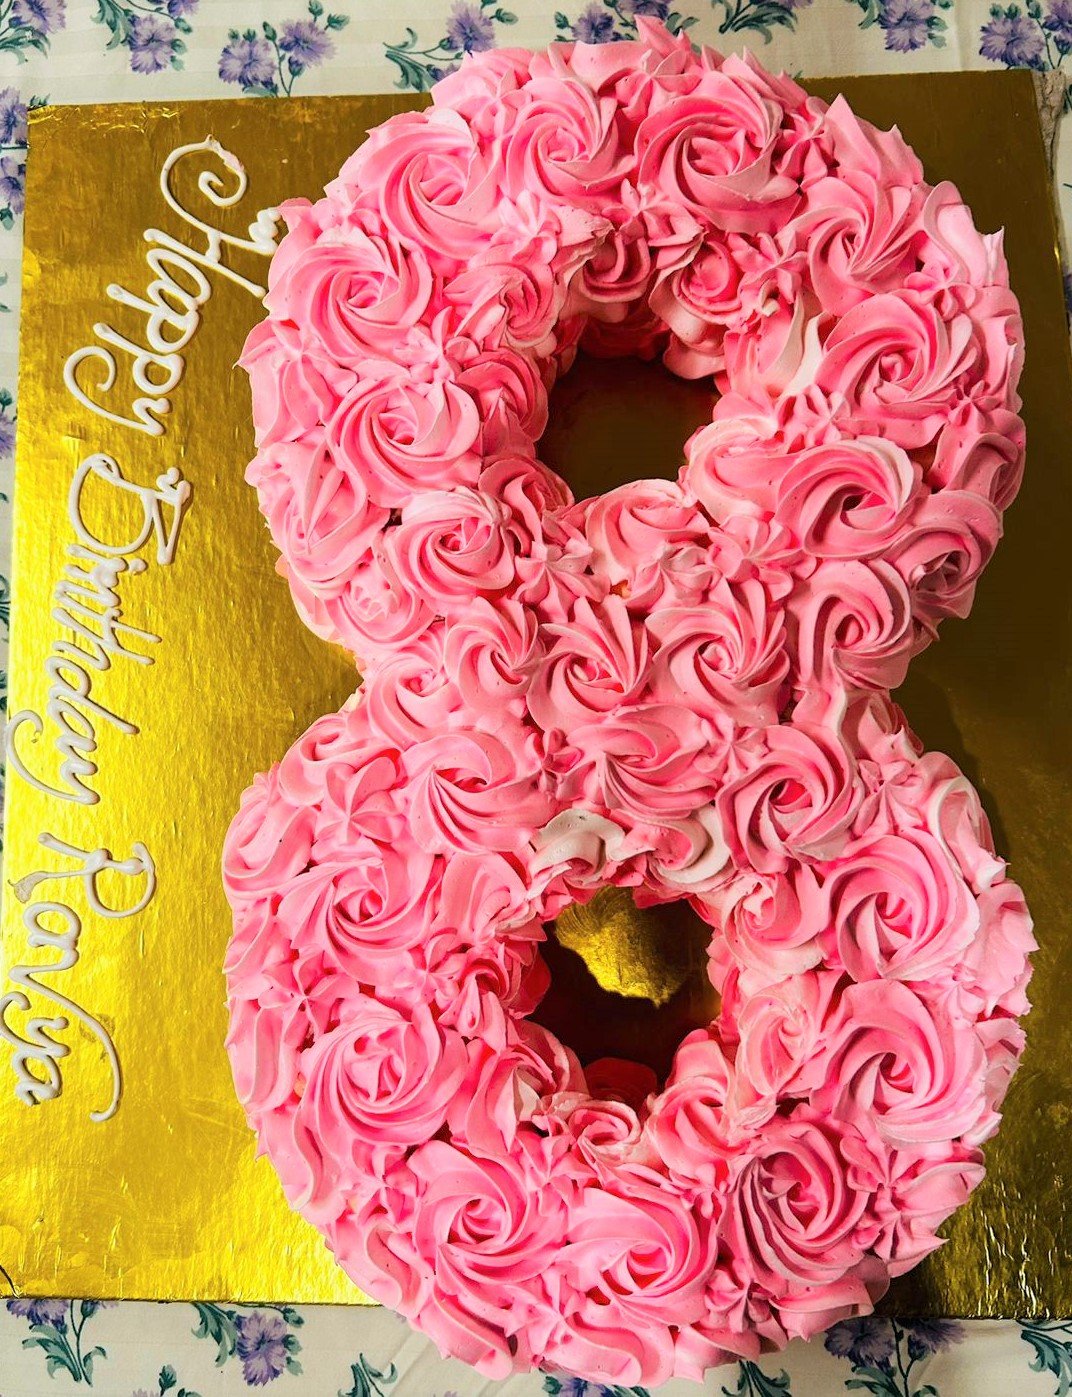 Number Cakes For Birthday  Anniversary  Order Number Cakes Online